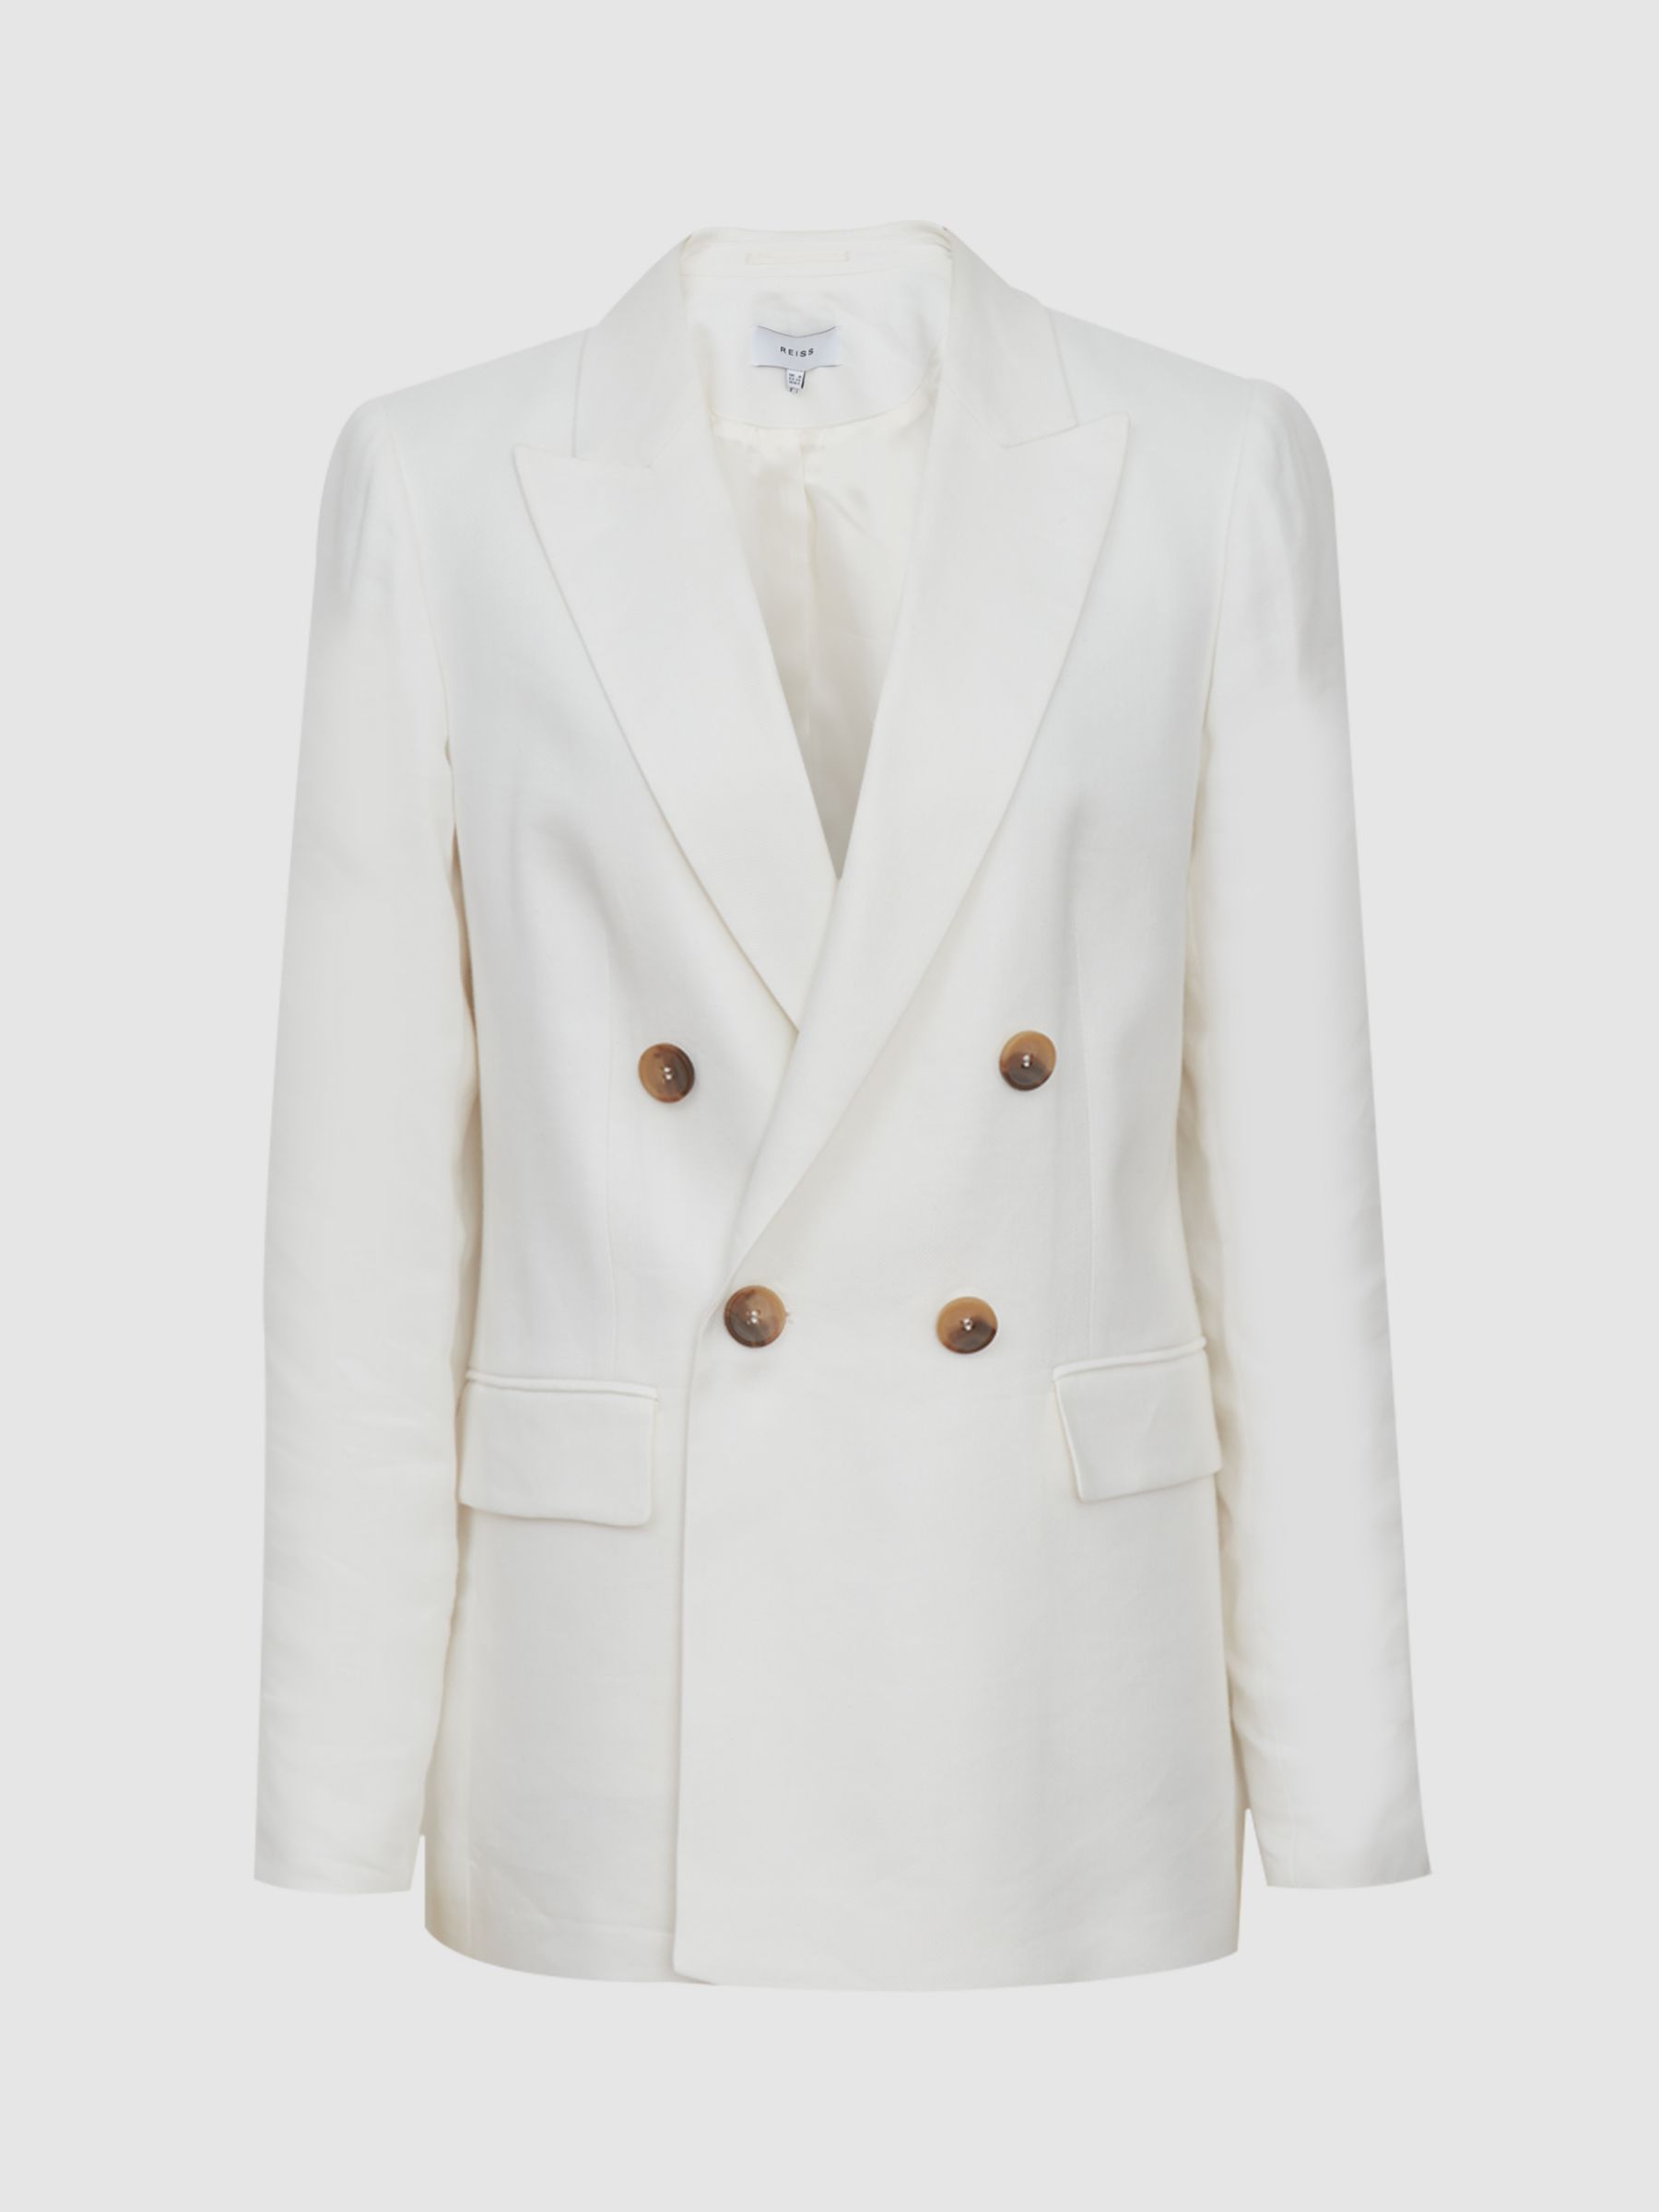 Reiss Willow Double Breasted Linen Blend Blazer, White at John Lewis ...